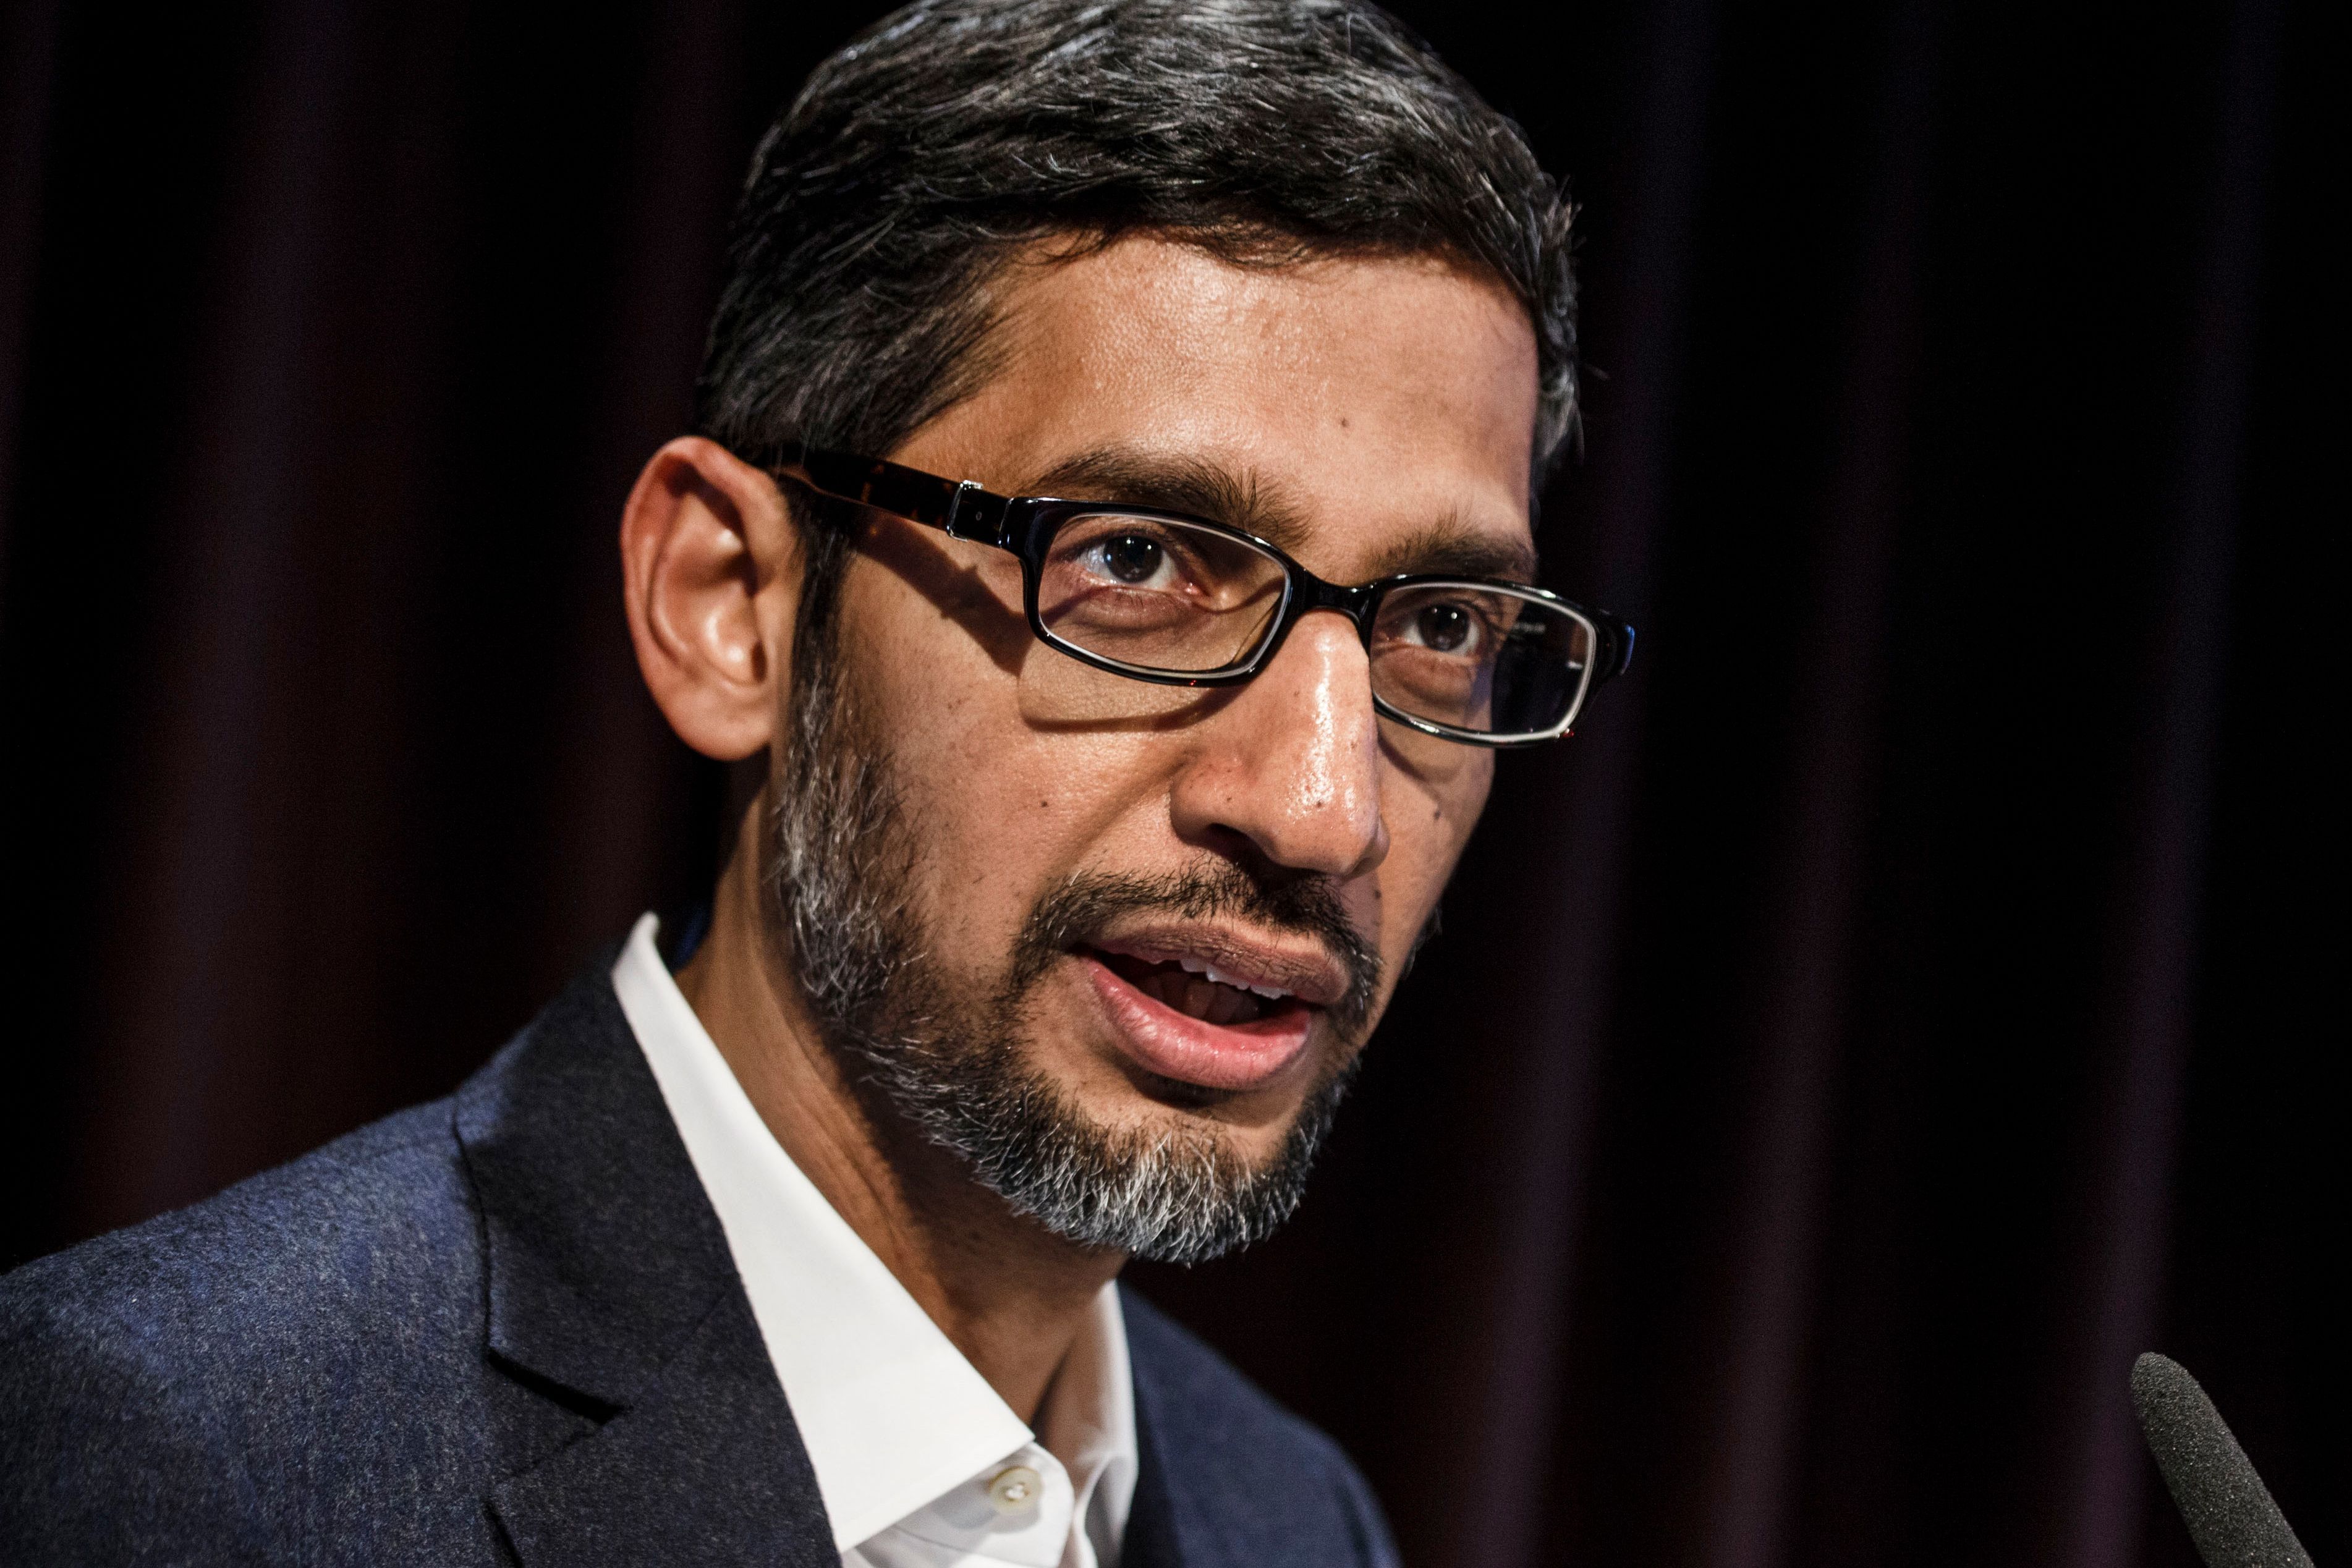 Google CEO says 'work on privacy and security is never done'